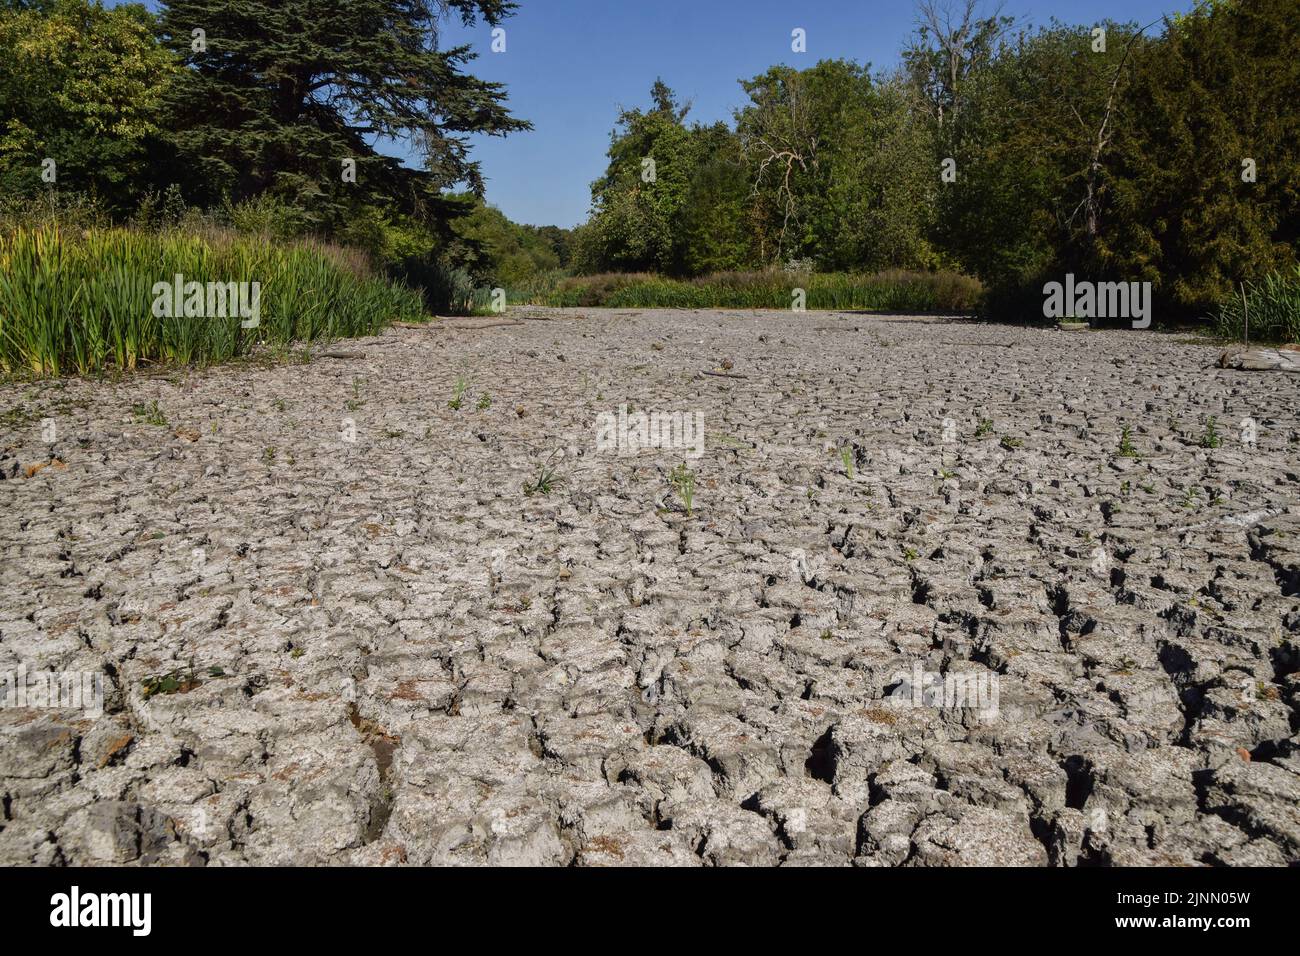 A completely dry large pond seen in Wanstead Park in north-east London, as a drought is declared in parts of England. Persistent heatwaves resulting from human-induced climate change have affected much of London, with wildfires and droughts seen across the capital. Stock Photo